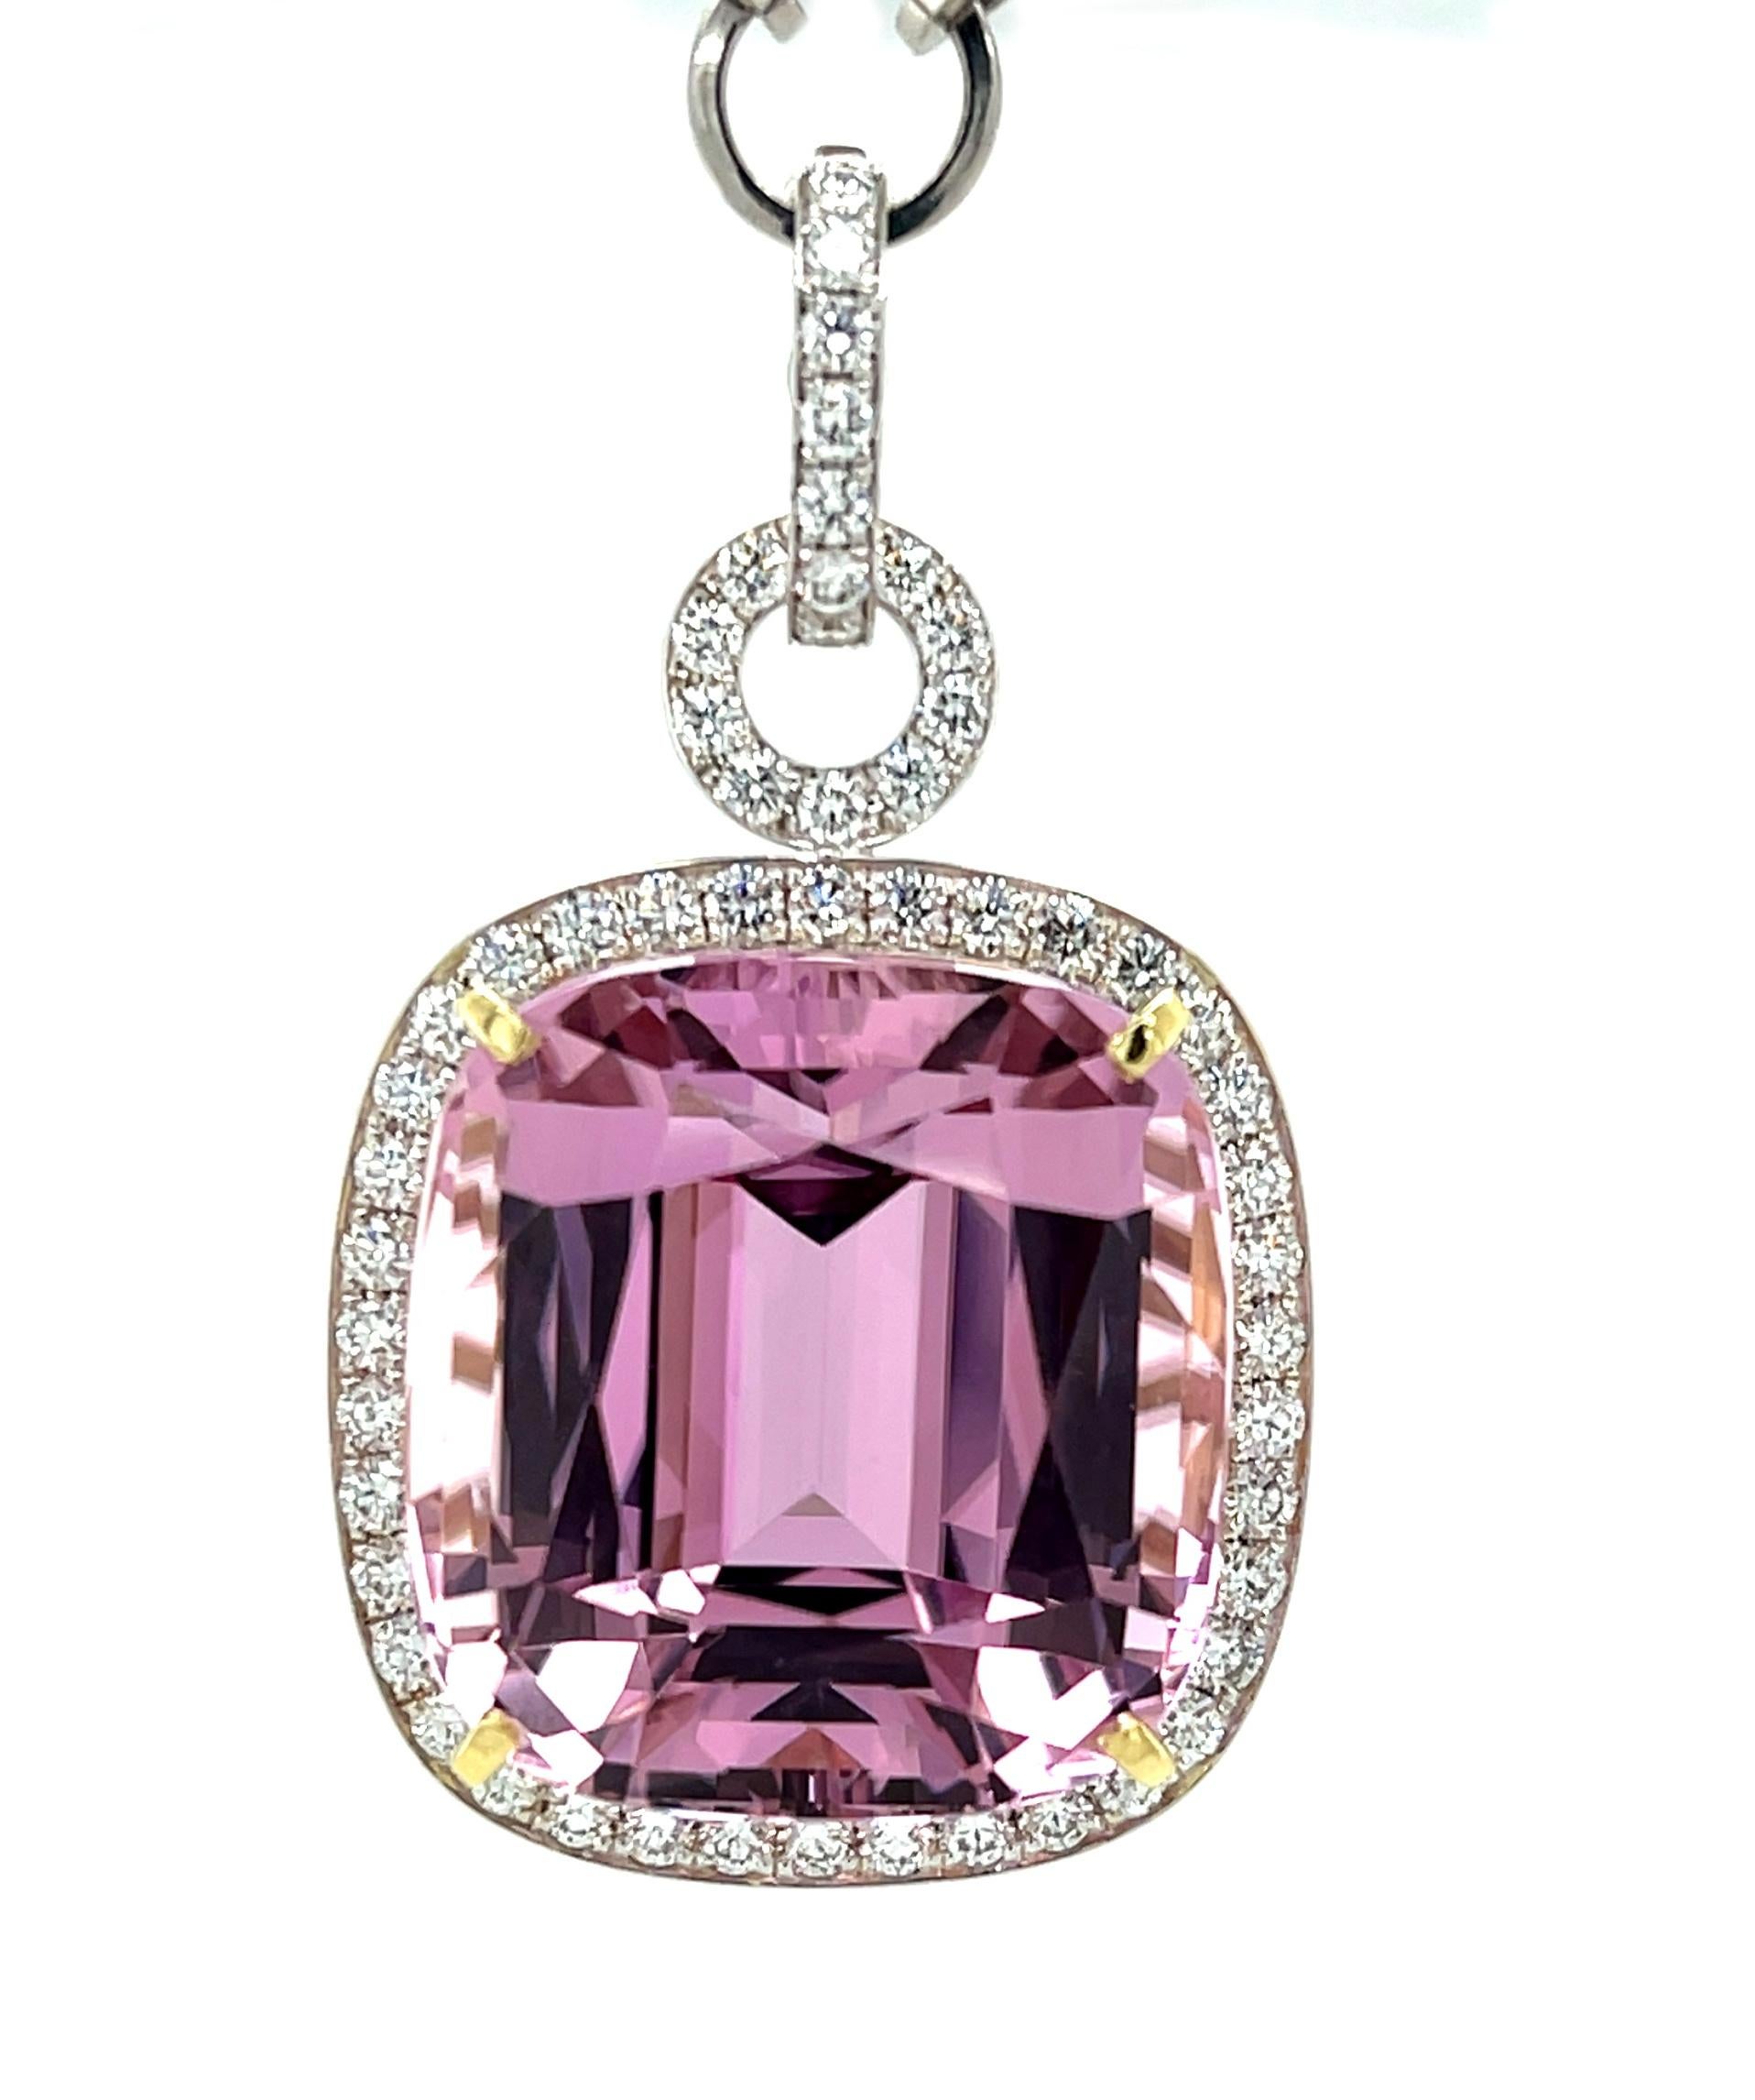 This beautiful statement necklace features a spectacular 61.26 carat kunzite cushion with stunning pink color! The gem is surrounded by fine diamonds in an original pendant that is breath-taking from every angle. The kunzite is beautifully